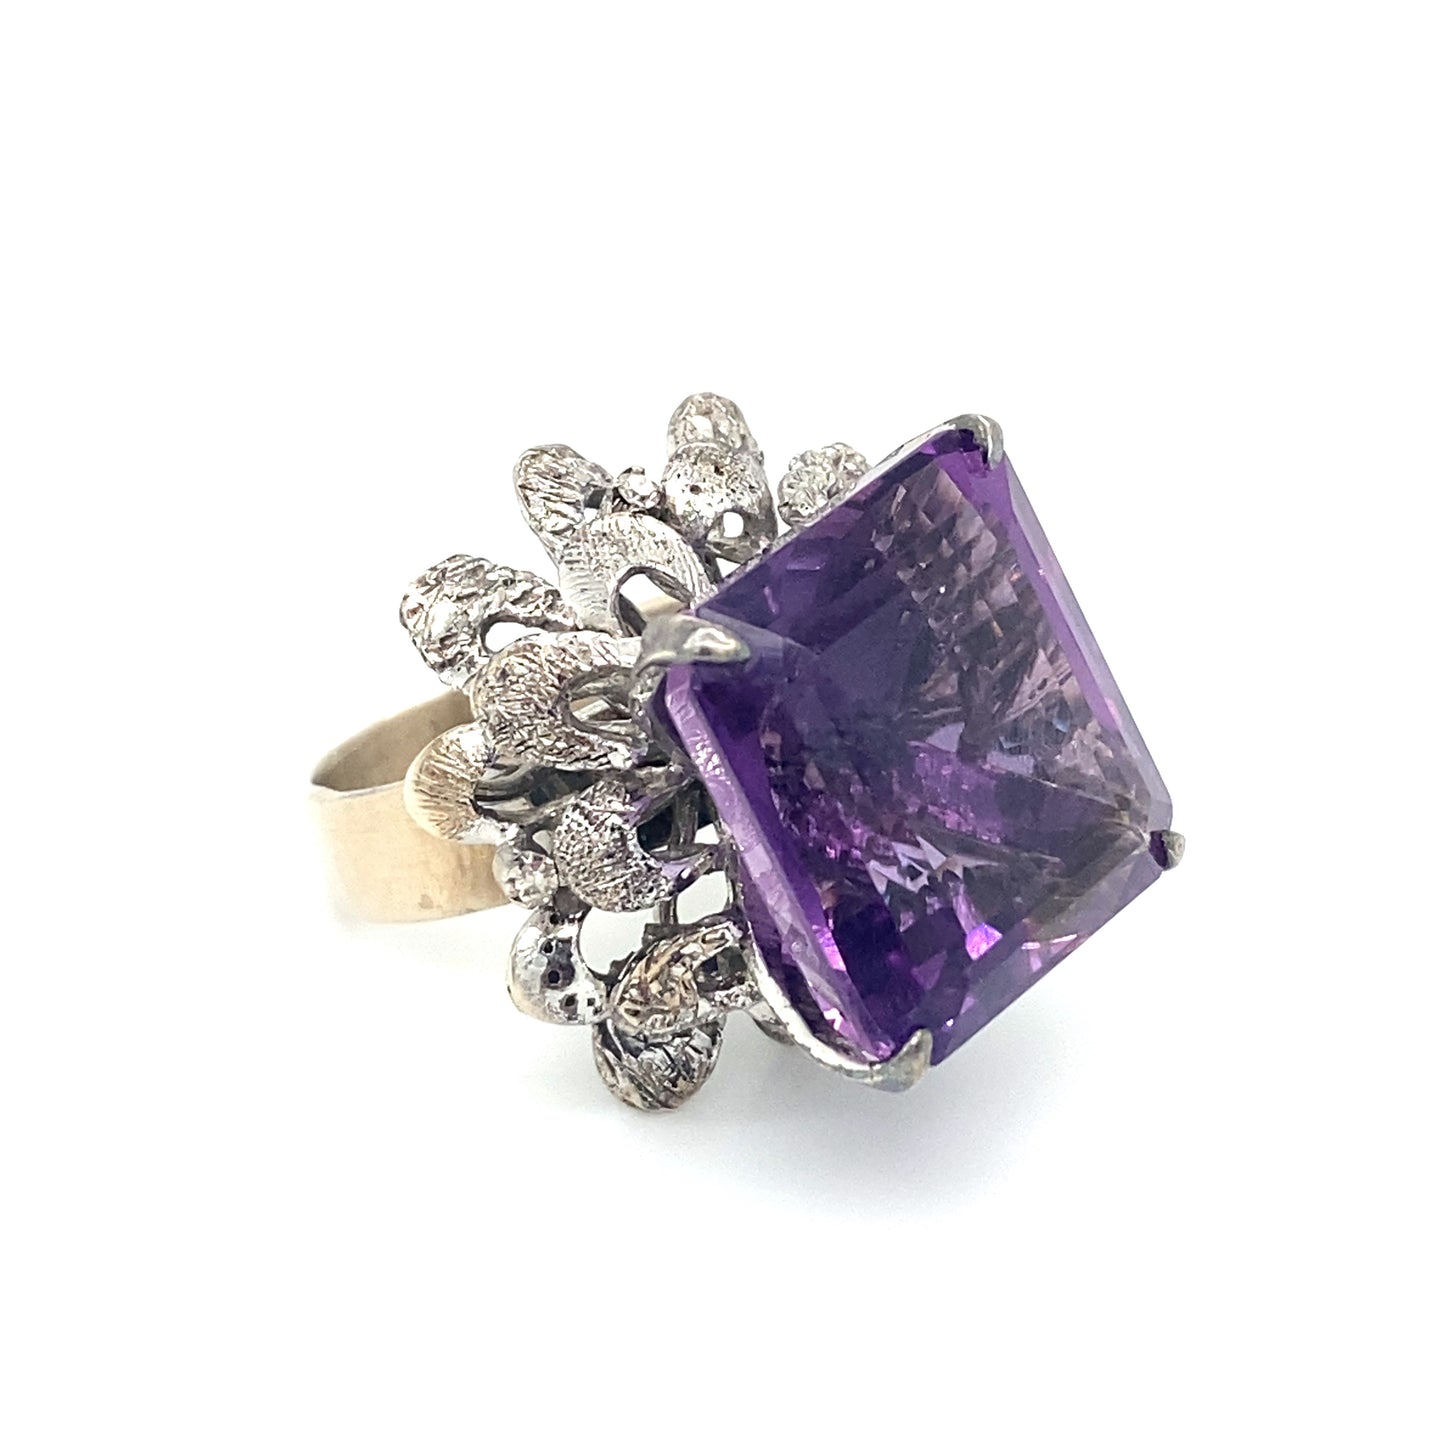 Retro Style 8.0ct Amethyst Cocktail Ring in 18K White Gold